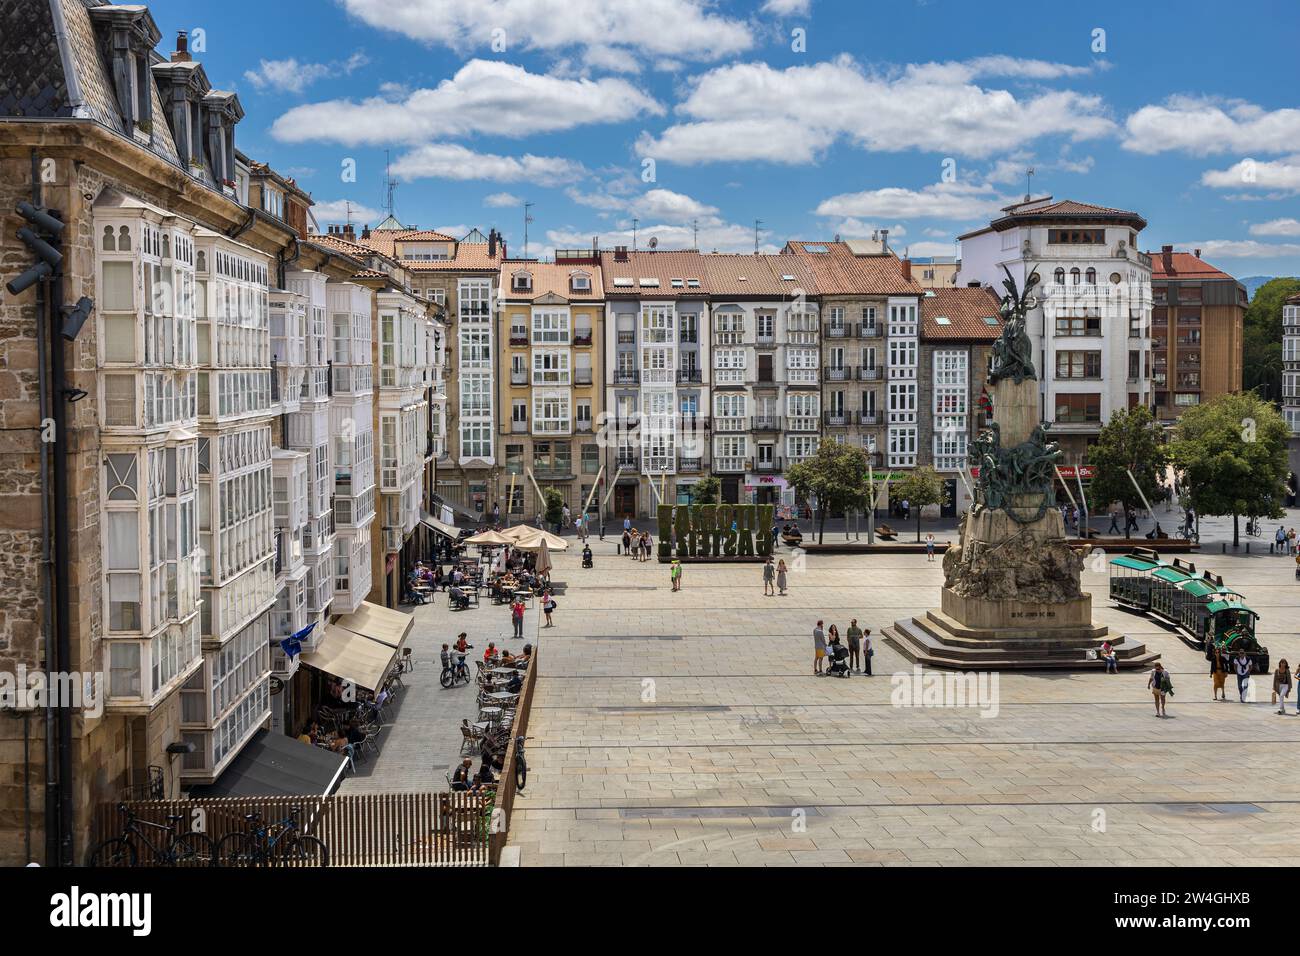 Plaza de la Virgen Blanca, square surrounded by old houses with glass verandas with the monument to La batalla de Vitoria. Basque Country, Spain Stock Photo